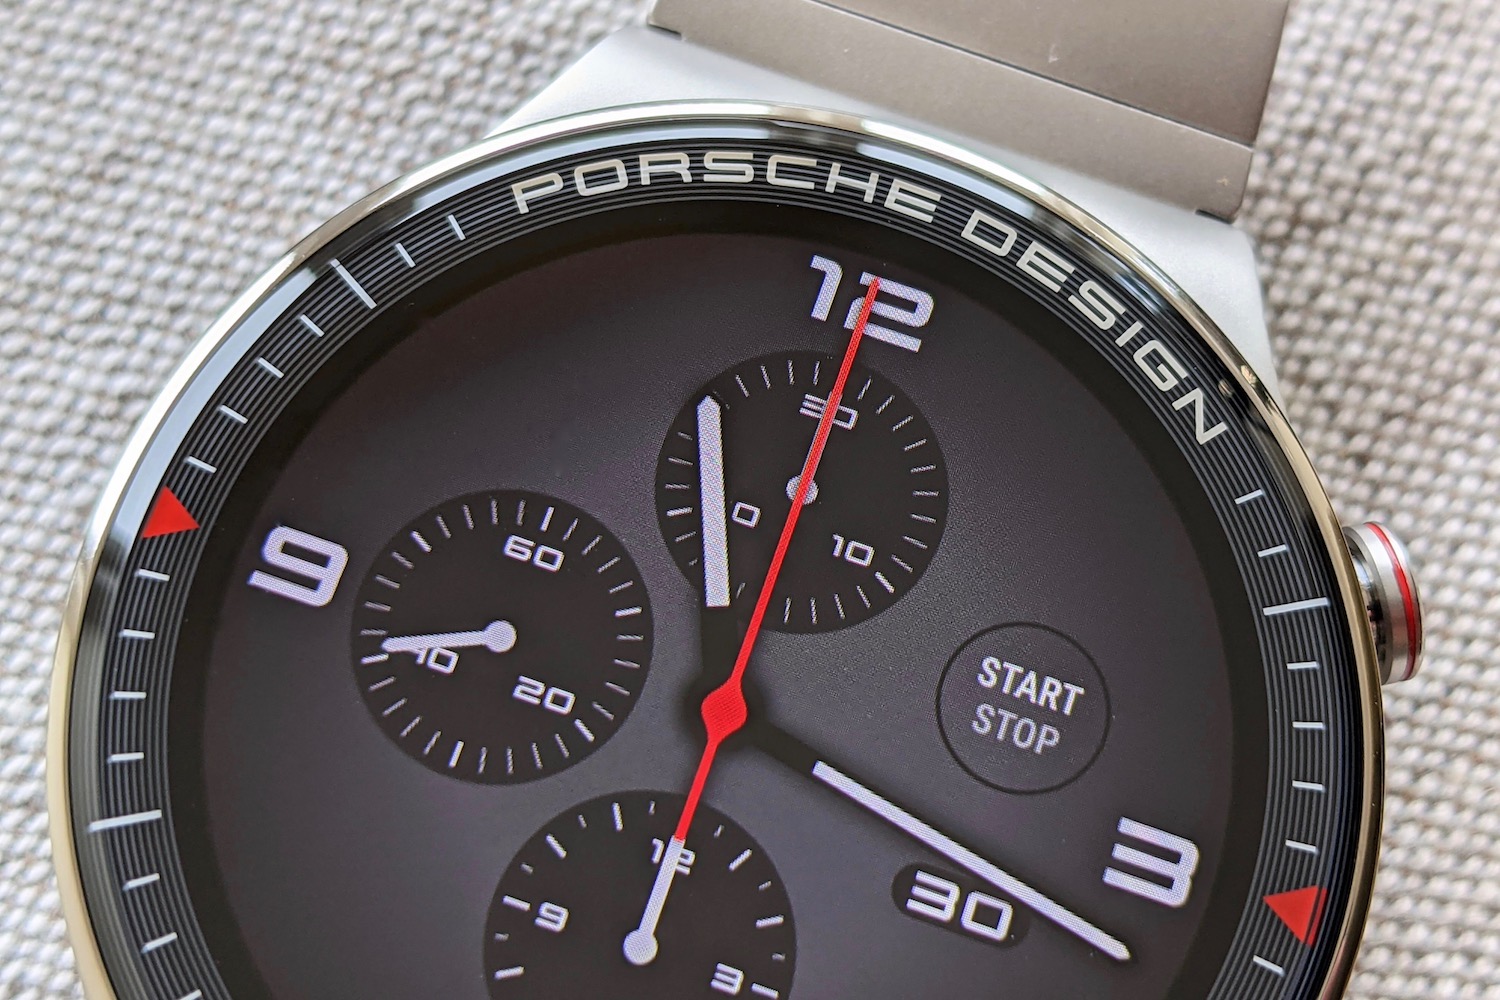 Porsche Design Watch GT2 Hands-on Review: All in the Name